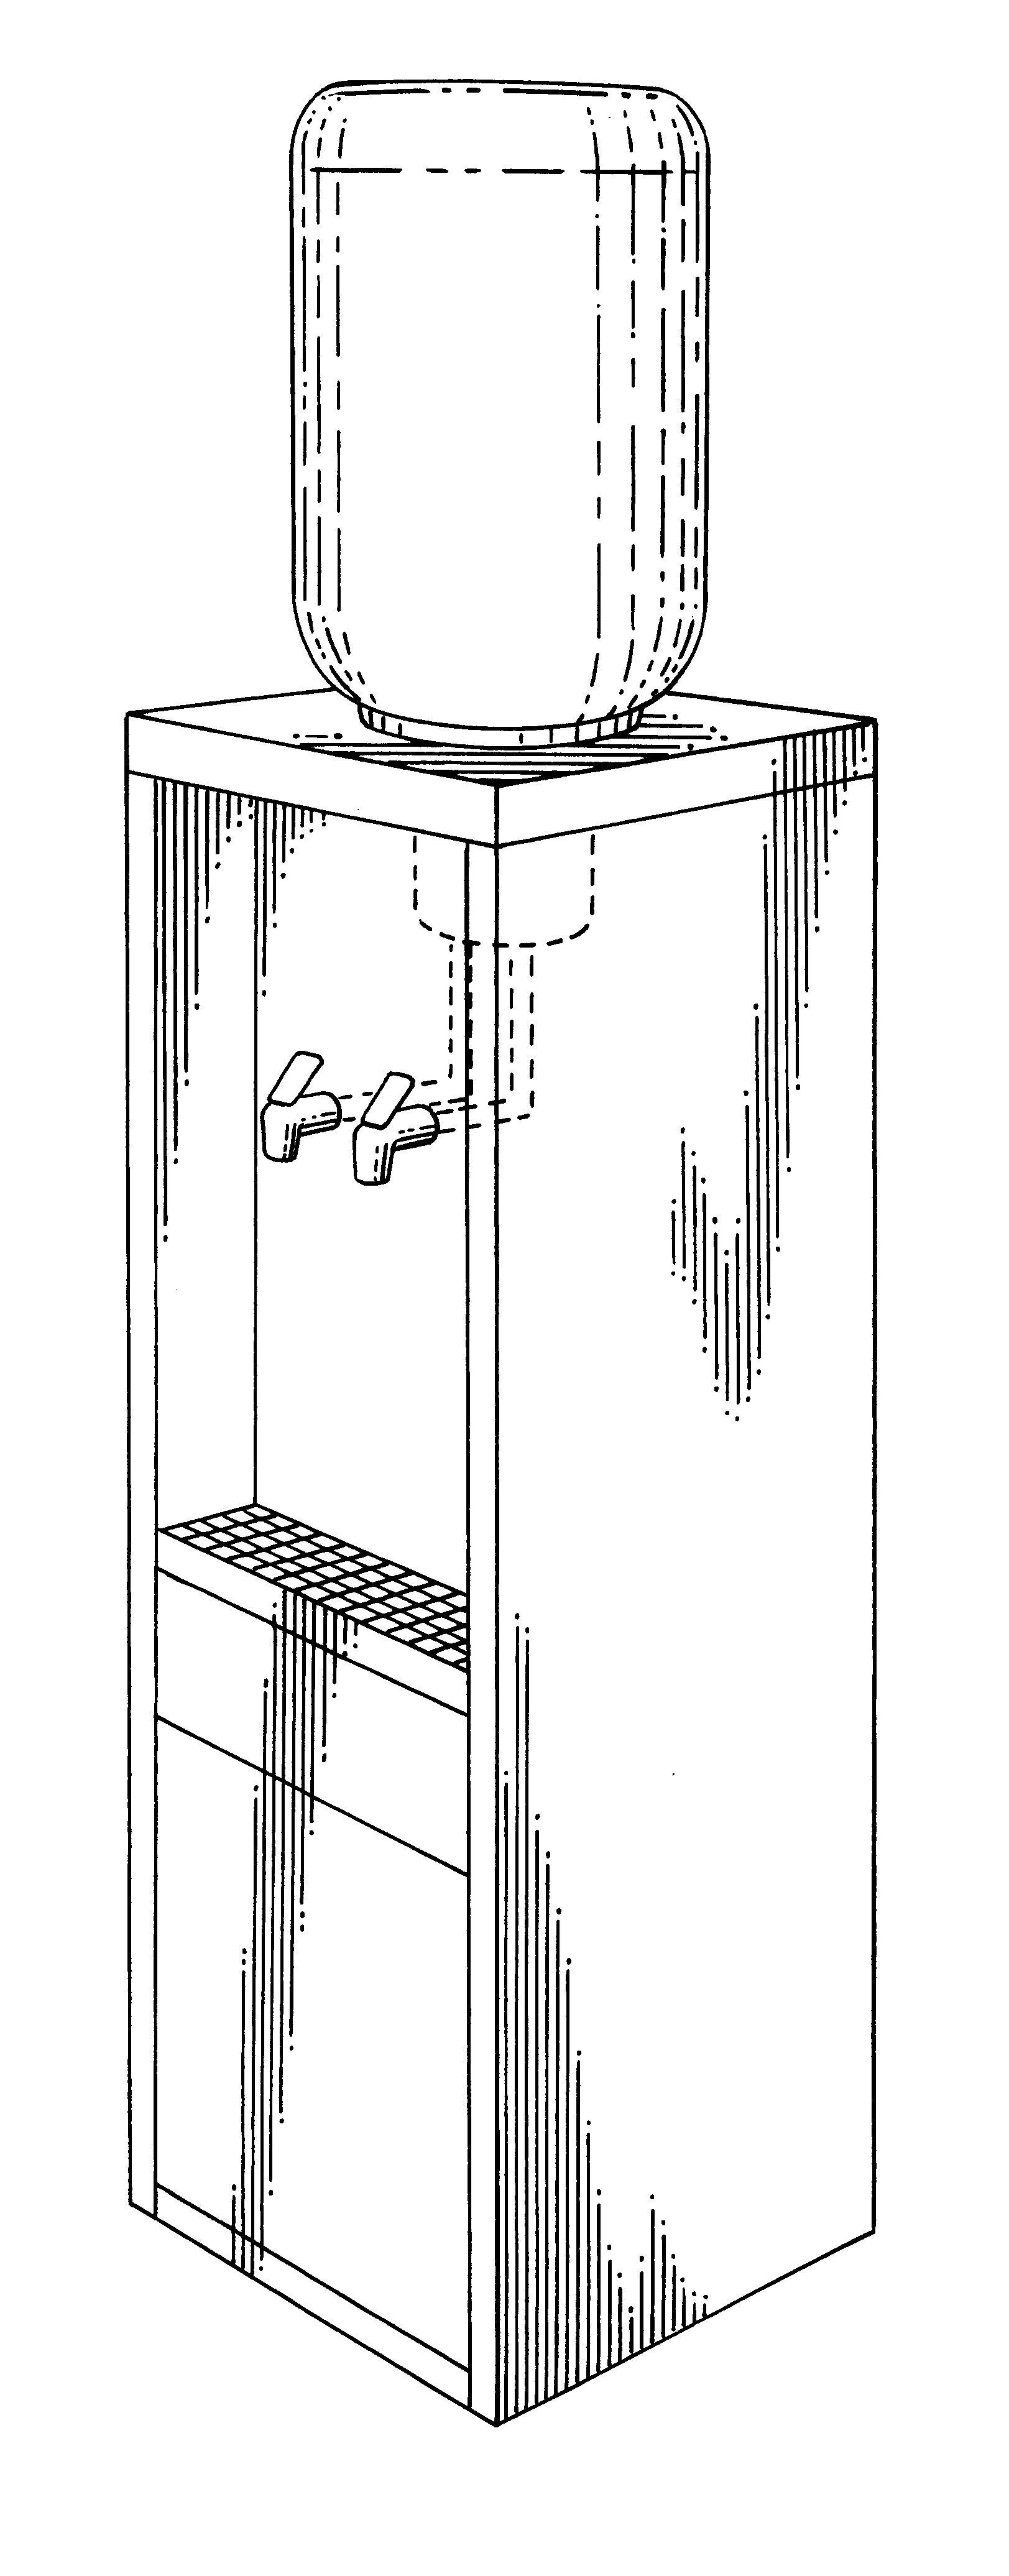 Biodegradable compound for cleaning, disinfecting, and descaling water dispensers and method of use thereof